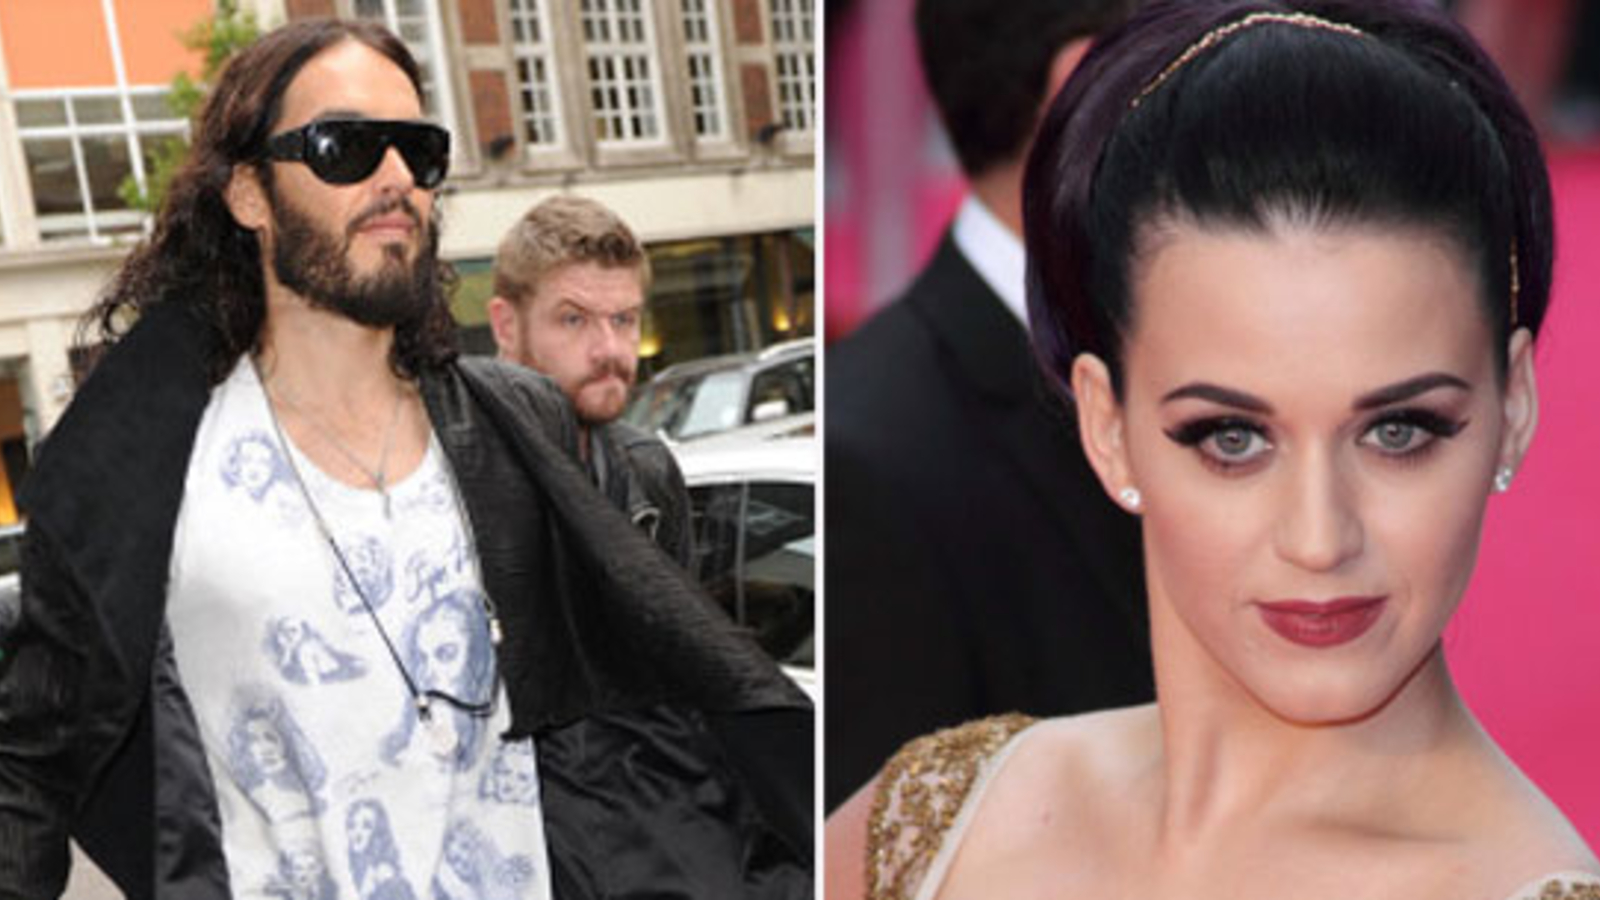 Russell Brand Spottet über Sex Mit Katy Perry Oe24 At